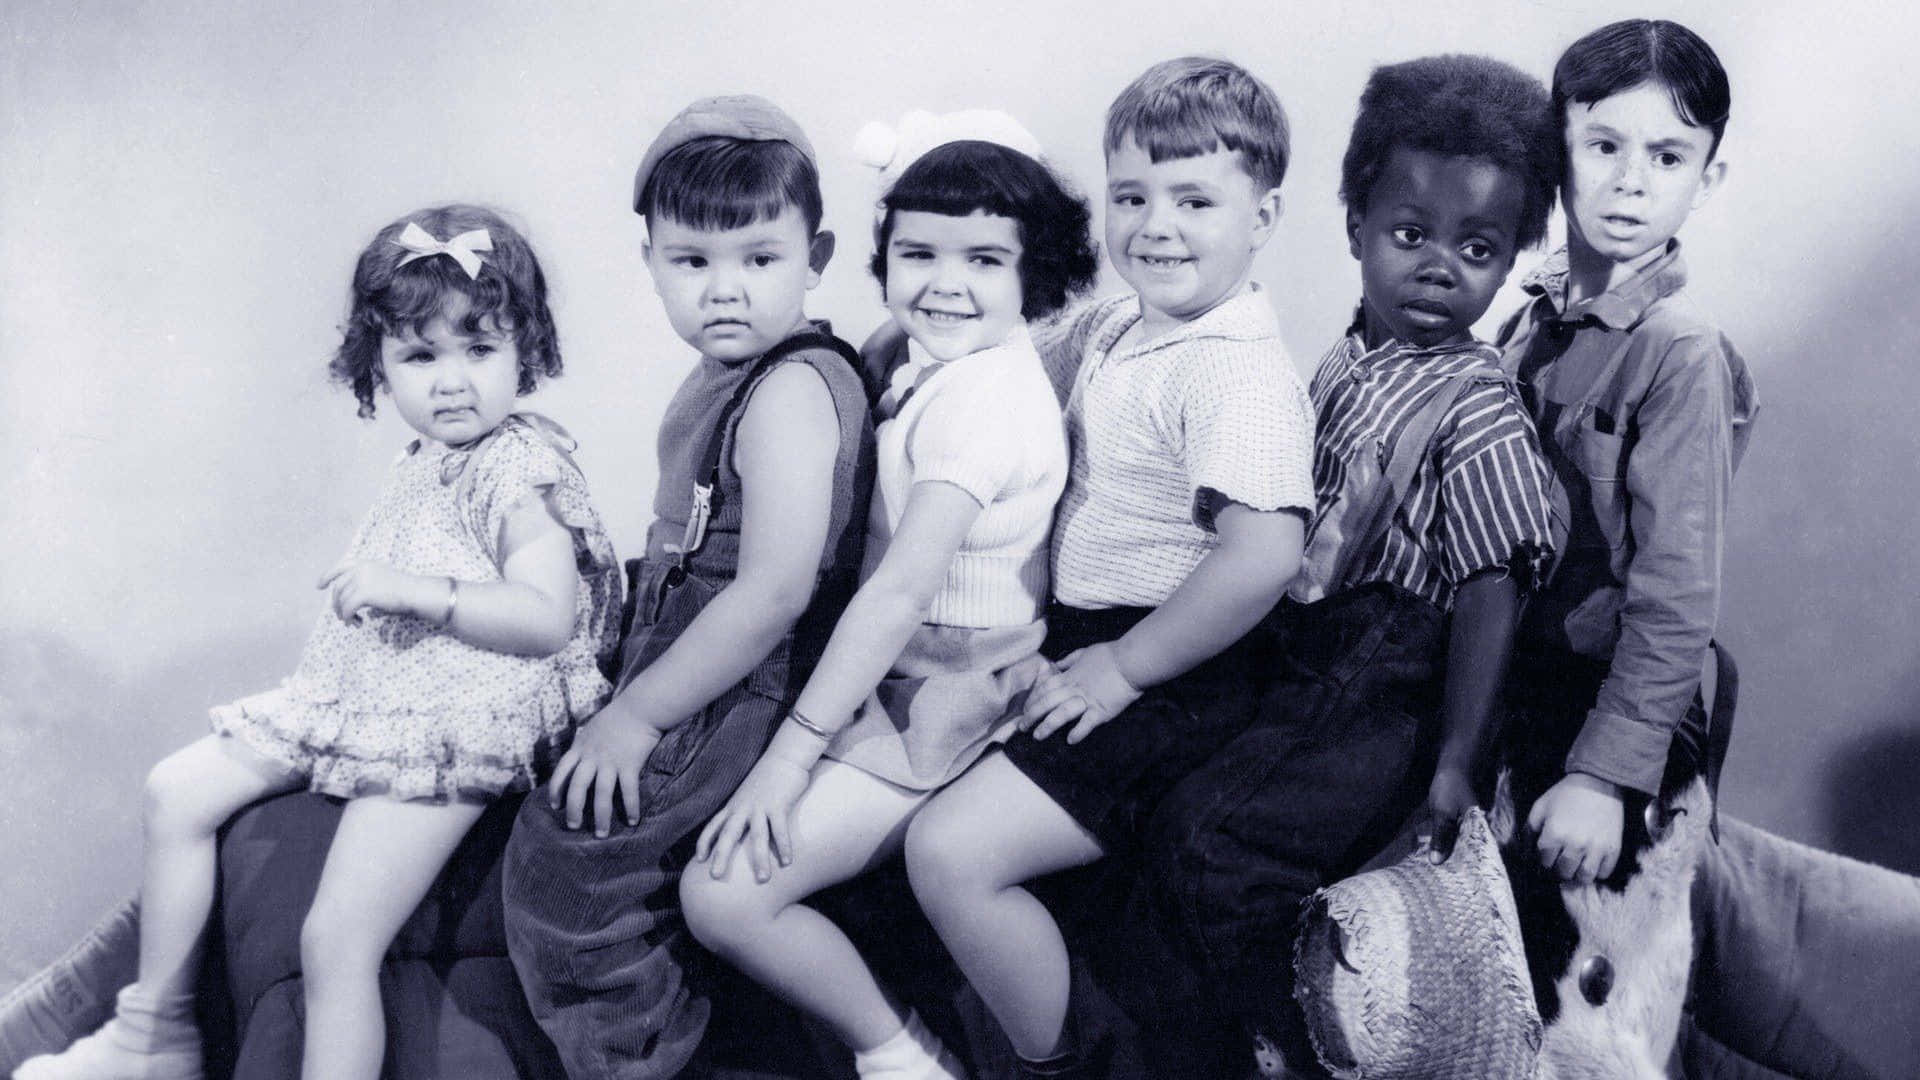 A Group Of Children Posing For A Photo